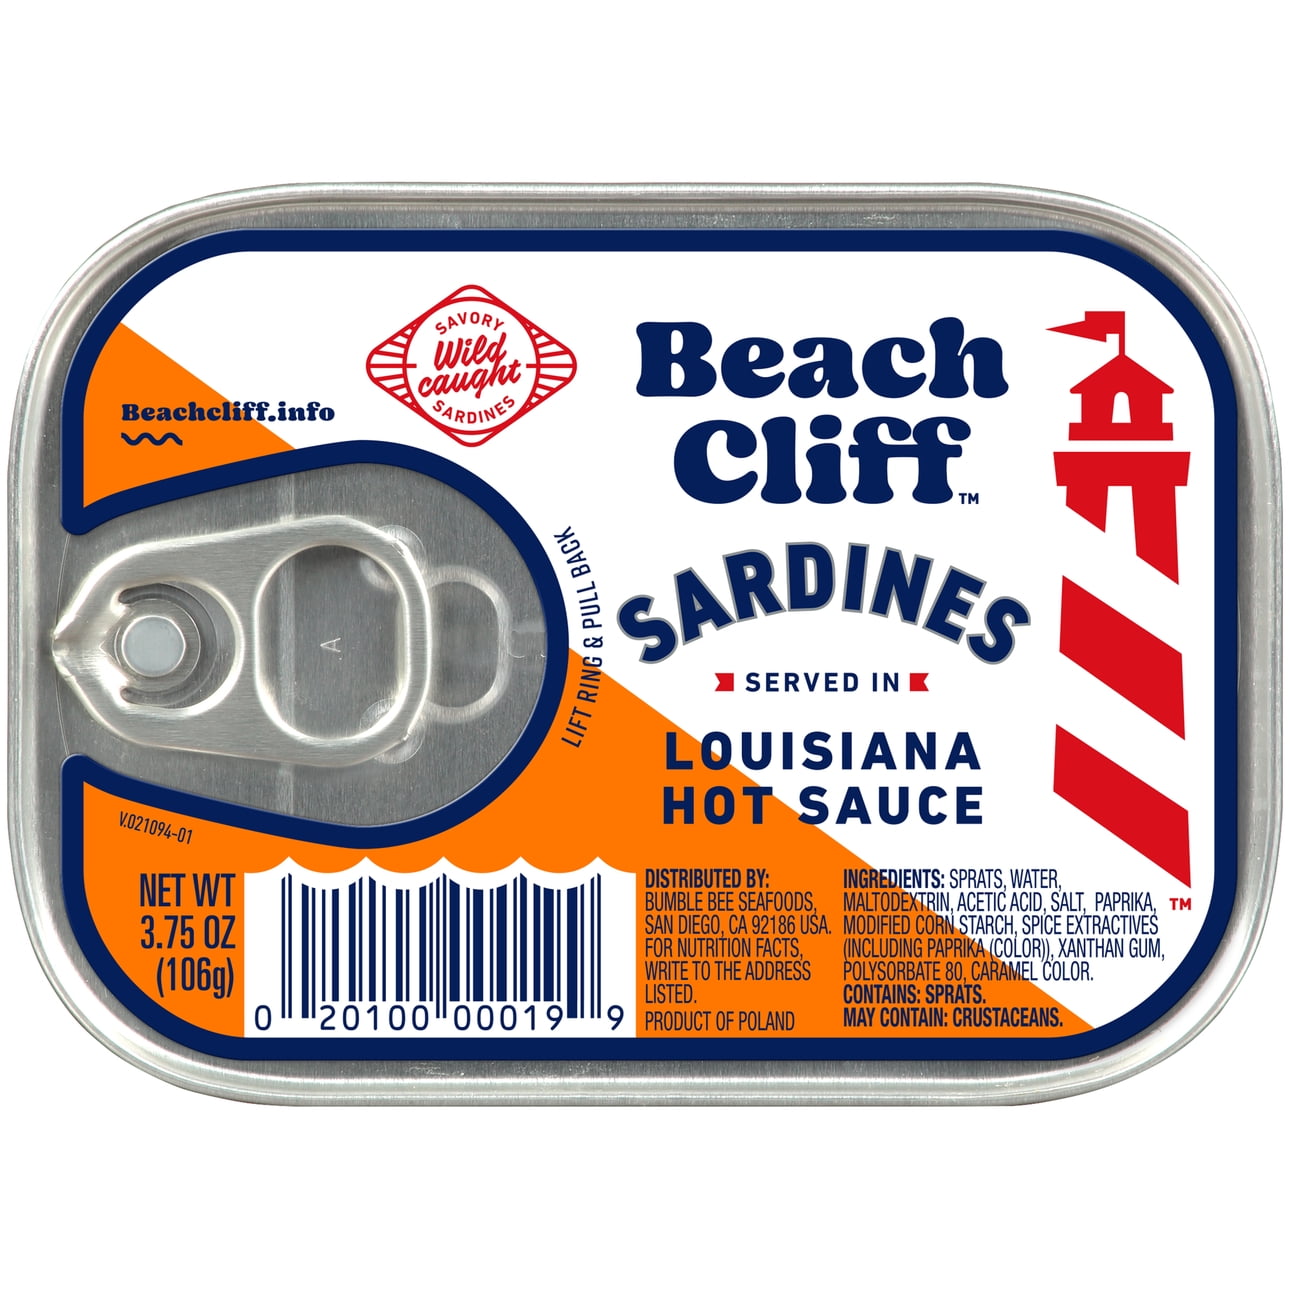 Beach Cliff Sardines in Louisiana Hot Sauce, 3.75 oz Can, Shelf Stable Canned Wild Caught Sardine, High in Protein